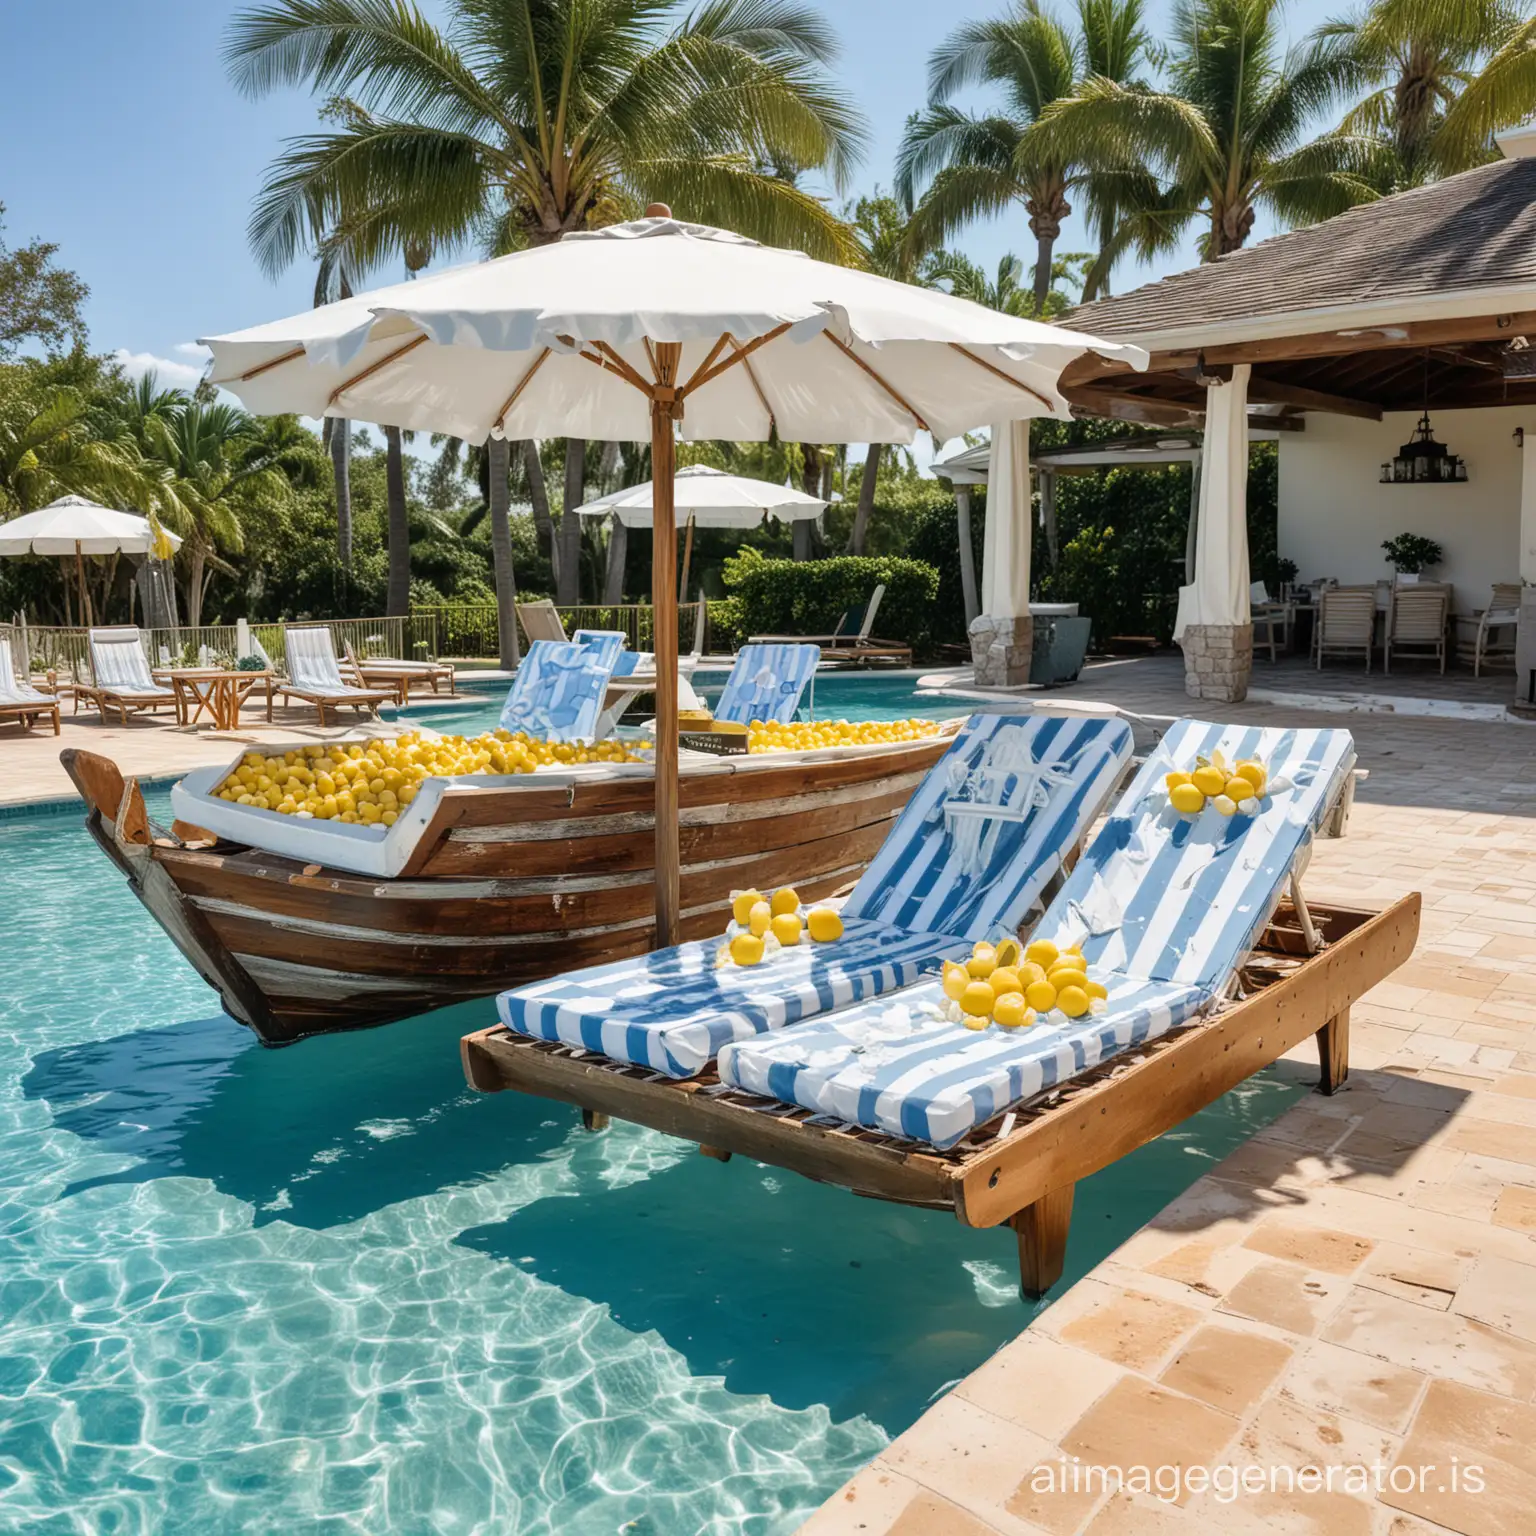 a wooden boat full of ice and lemons being a lemonade station in a pool resort that have white and blue stripped parasols and long chairs